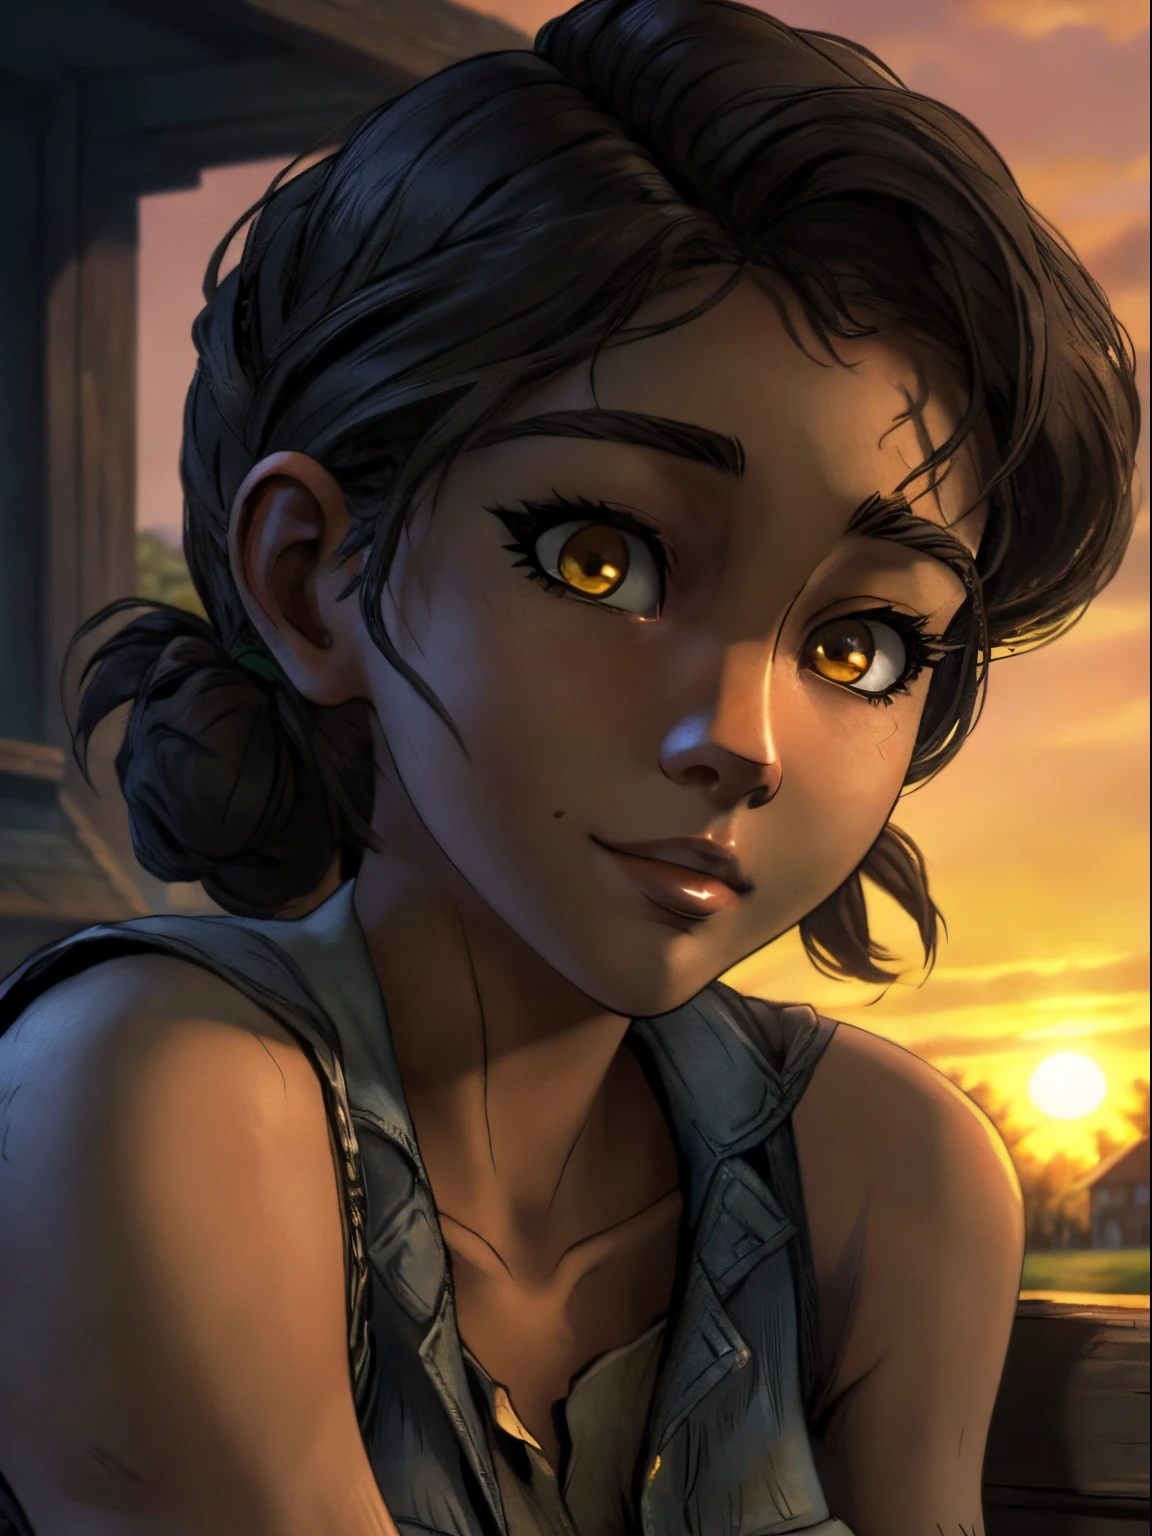 ((ultra quality)), ((tmasterpiece)), Clementine from the walking dead, ((Black, hairlong)) (Beautiful cute face), (beautiful female lips), Charming, ((aroused expression)), looks at the camera with a gentle smile, eyes are slightly closed, (skin color dark), Body glare, ((detailed beautiful female eyes)), ((dark yellow eyes)), (juicy female lips), (beautiful female hands), ((perfect female figure)), perfect female body, Beautiful waist, gorgeous big thighs, beautiful breasts, ((Subtle and beautiful)), sitting on a bench, (close-up of the face), (wearing blue jeans, gray sleeveless tank) background: country house, backyard, evening, Beautiful sunset, ((Depth of field)), ((high quality clear image)), (crisp details), ((higly detailed)), Realistic, Professional Photo Session, ((Clear Focus)), the anime